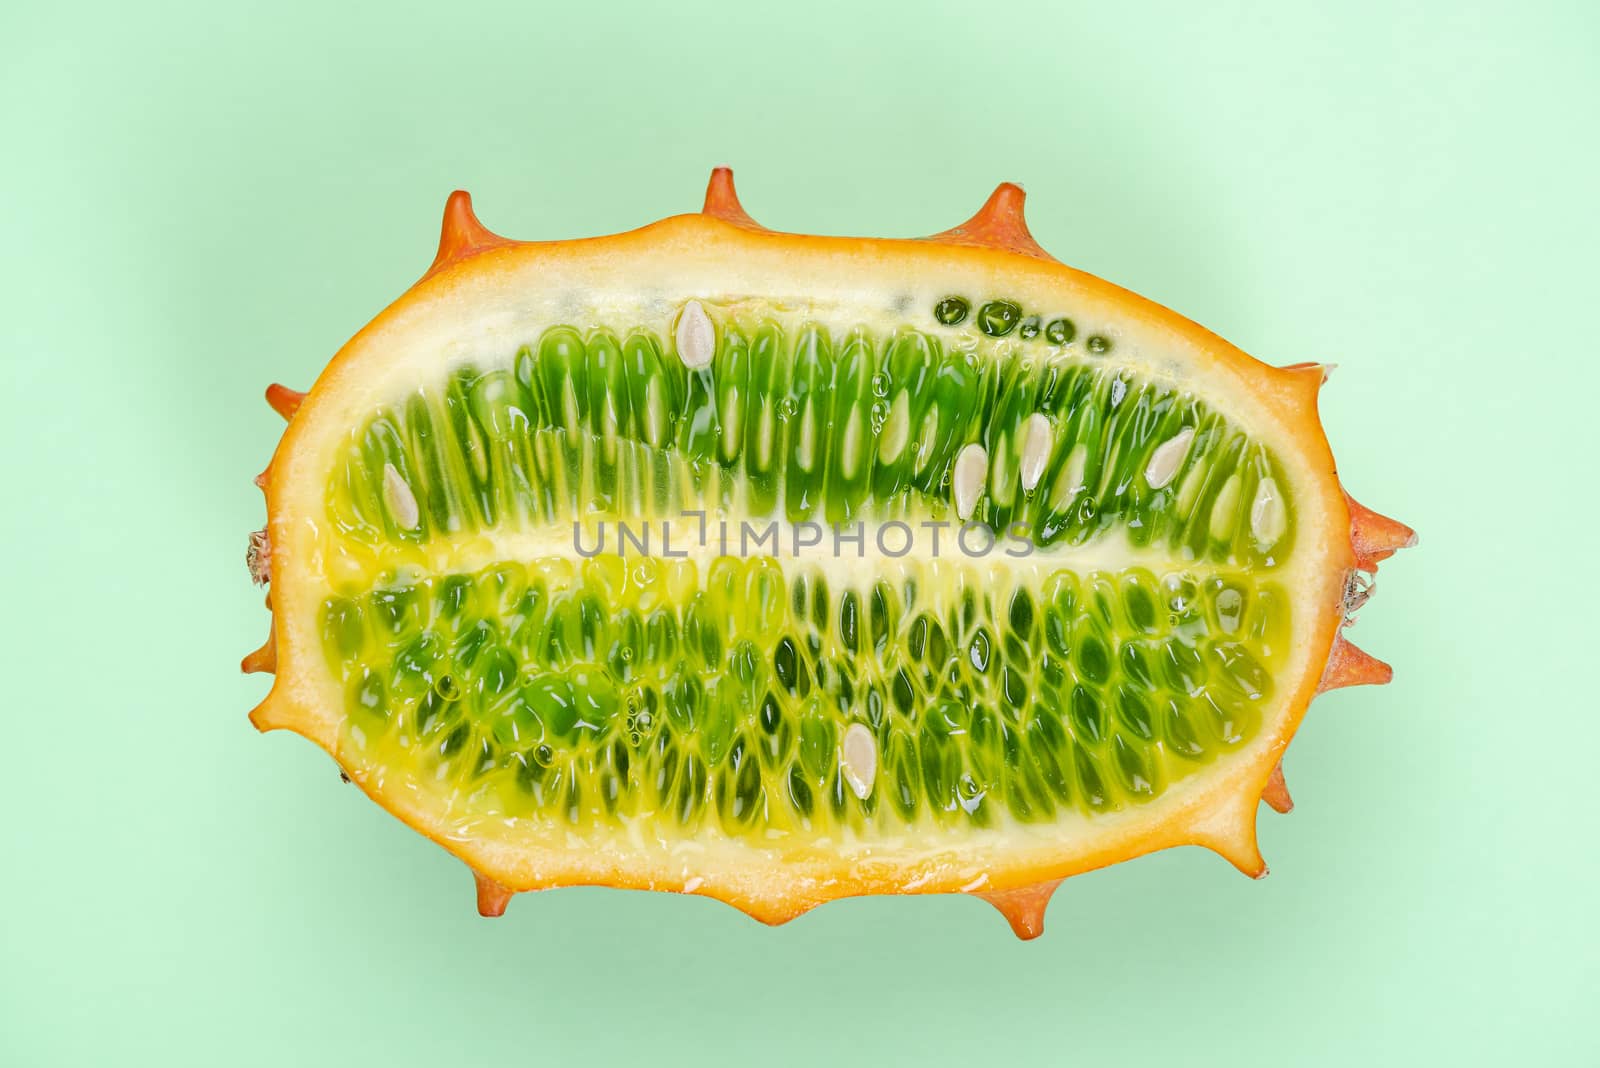 Kiwano or Horned Melon Fruit Cut in Half. Exotic Fruit. Detail Close Up. Pastel Background.